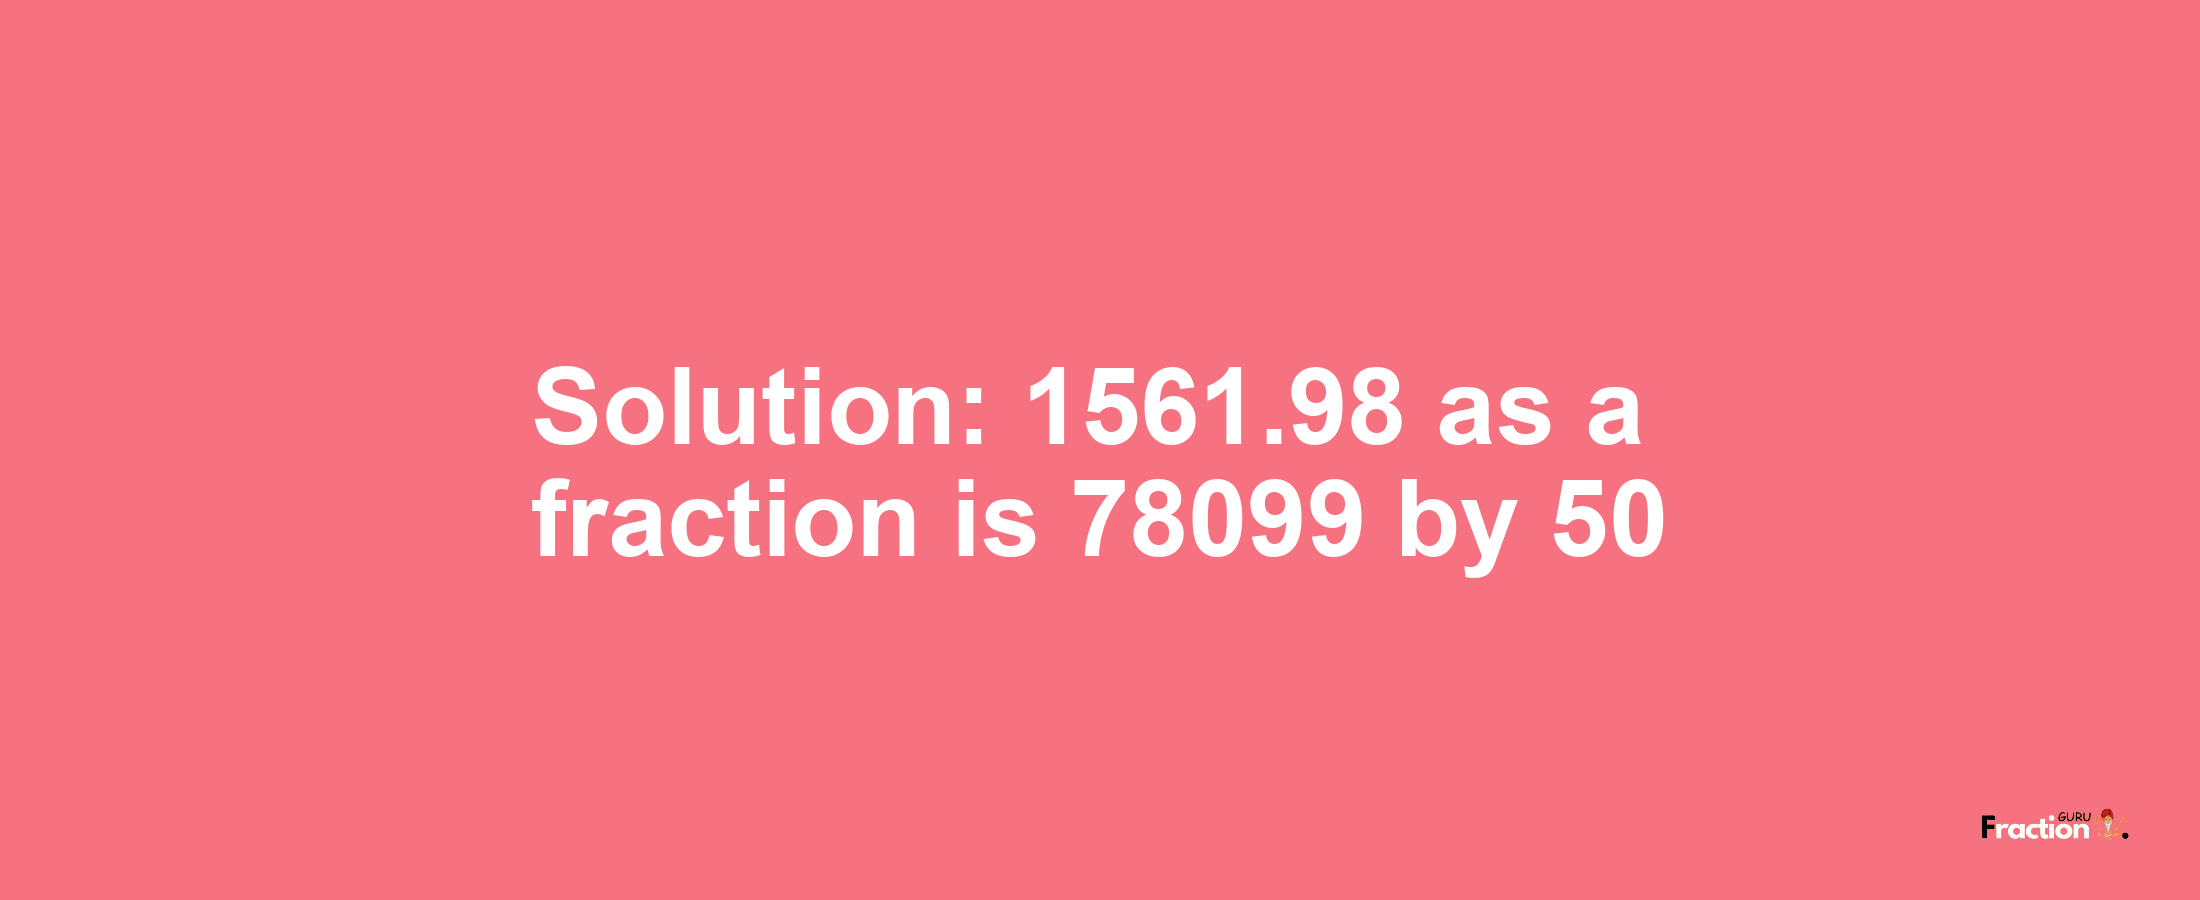 Solution:1561.98 as a fraction is 78099/50